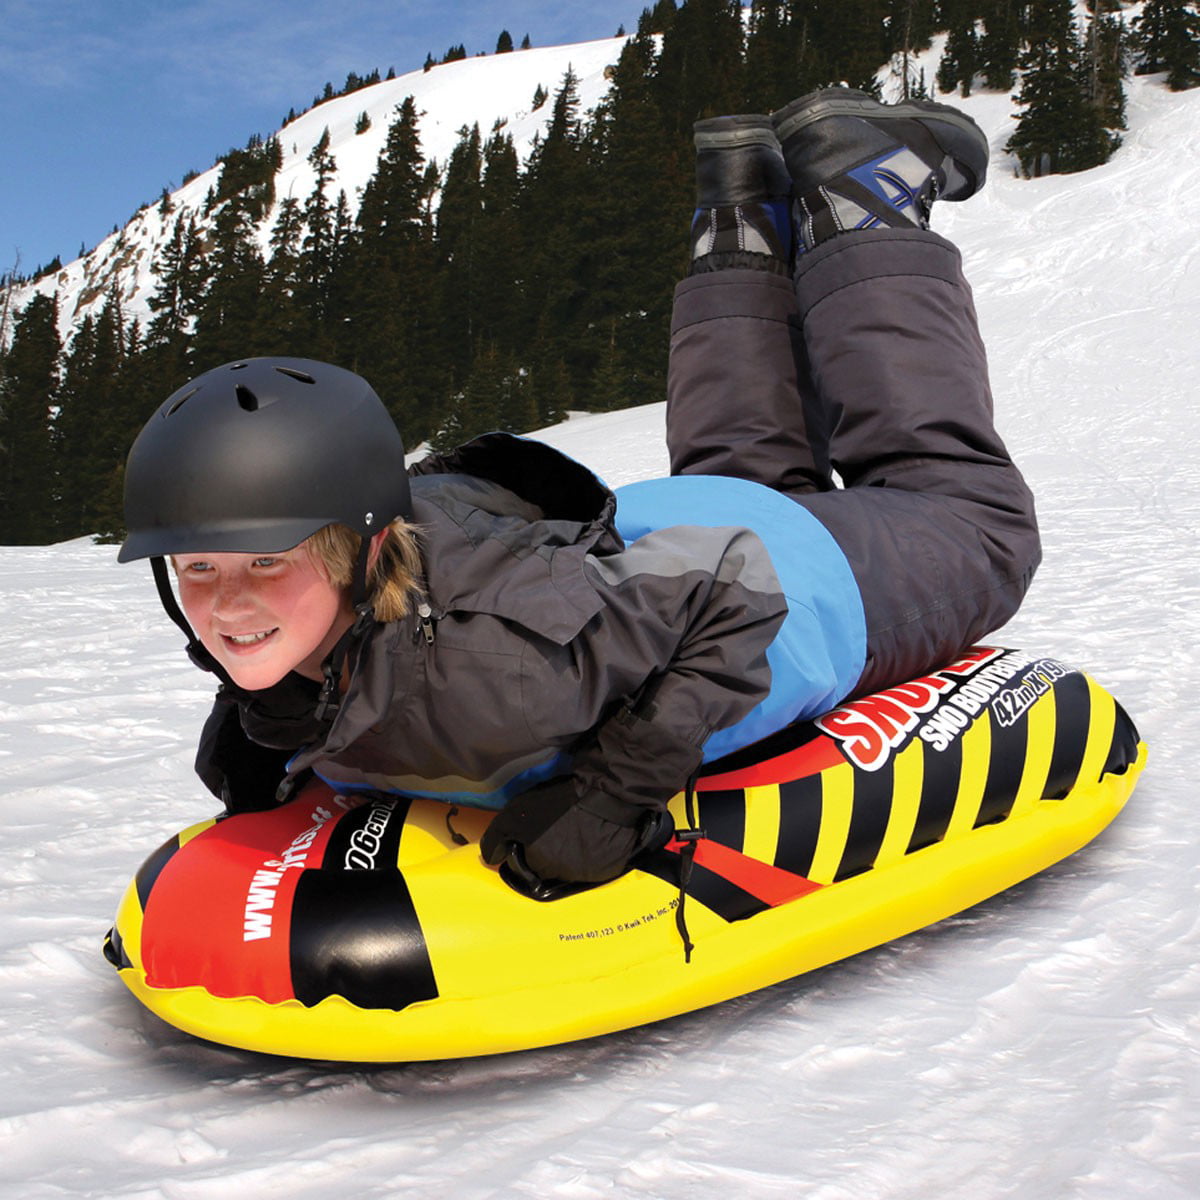 Inflatable Donut Snow Tube,31 Snow sled for Kids and Adults with 2 Handles Snow Toy for Kids,Snow Sledding Include Pump 16888 Winter Snow Tube